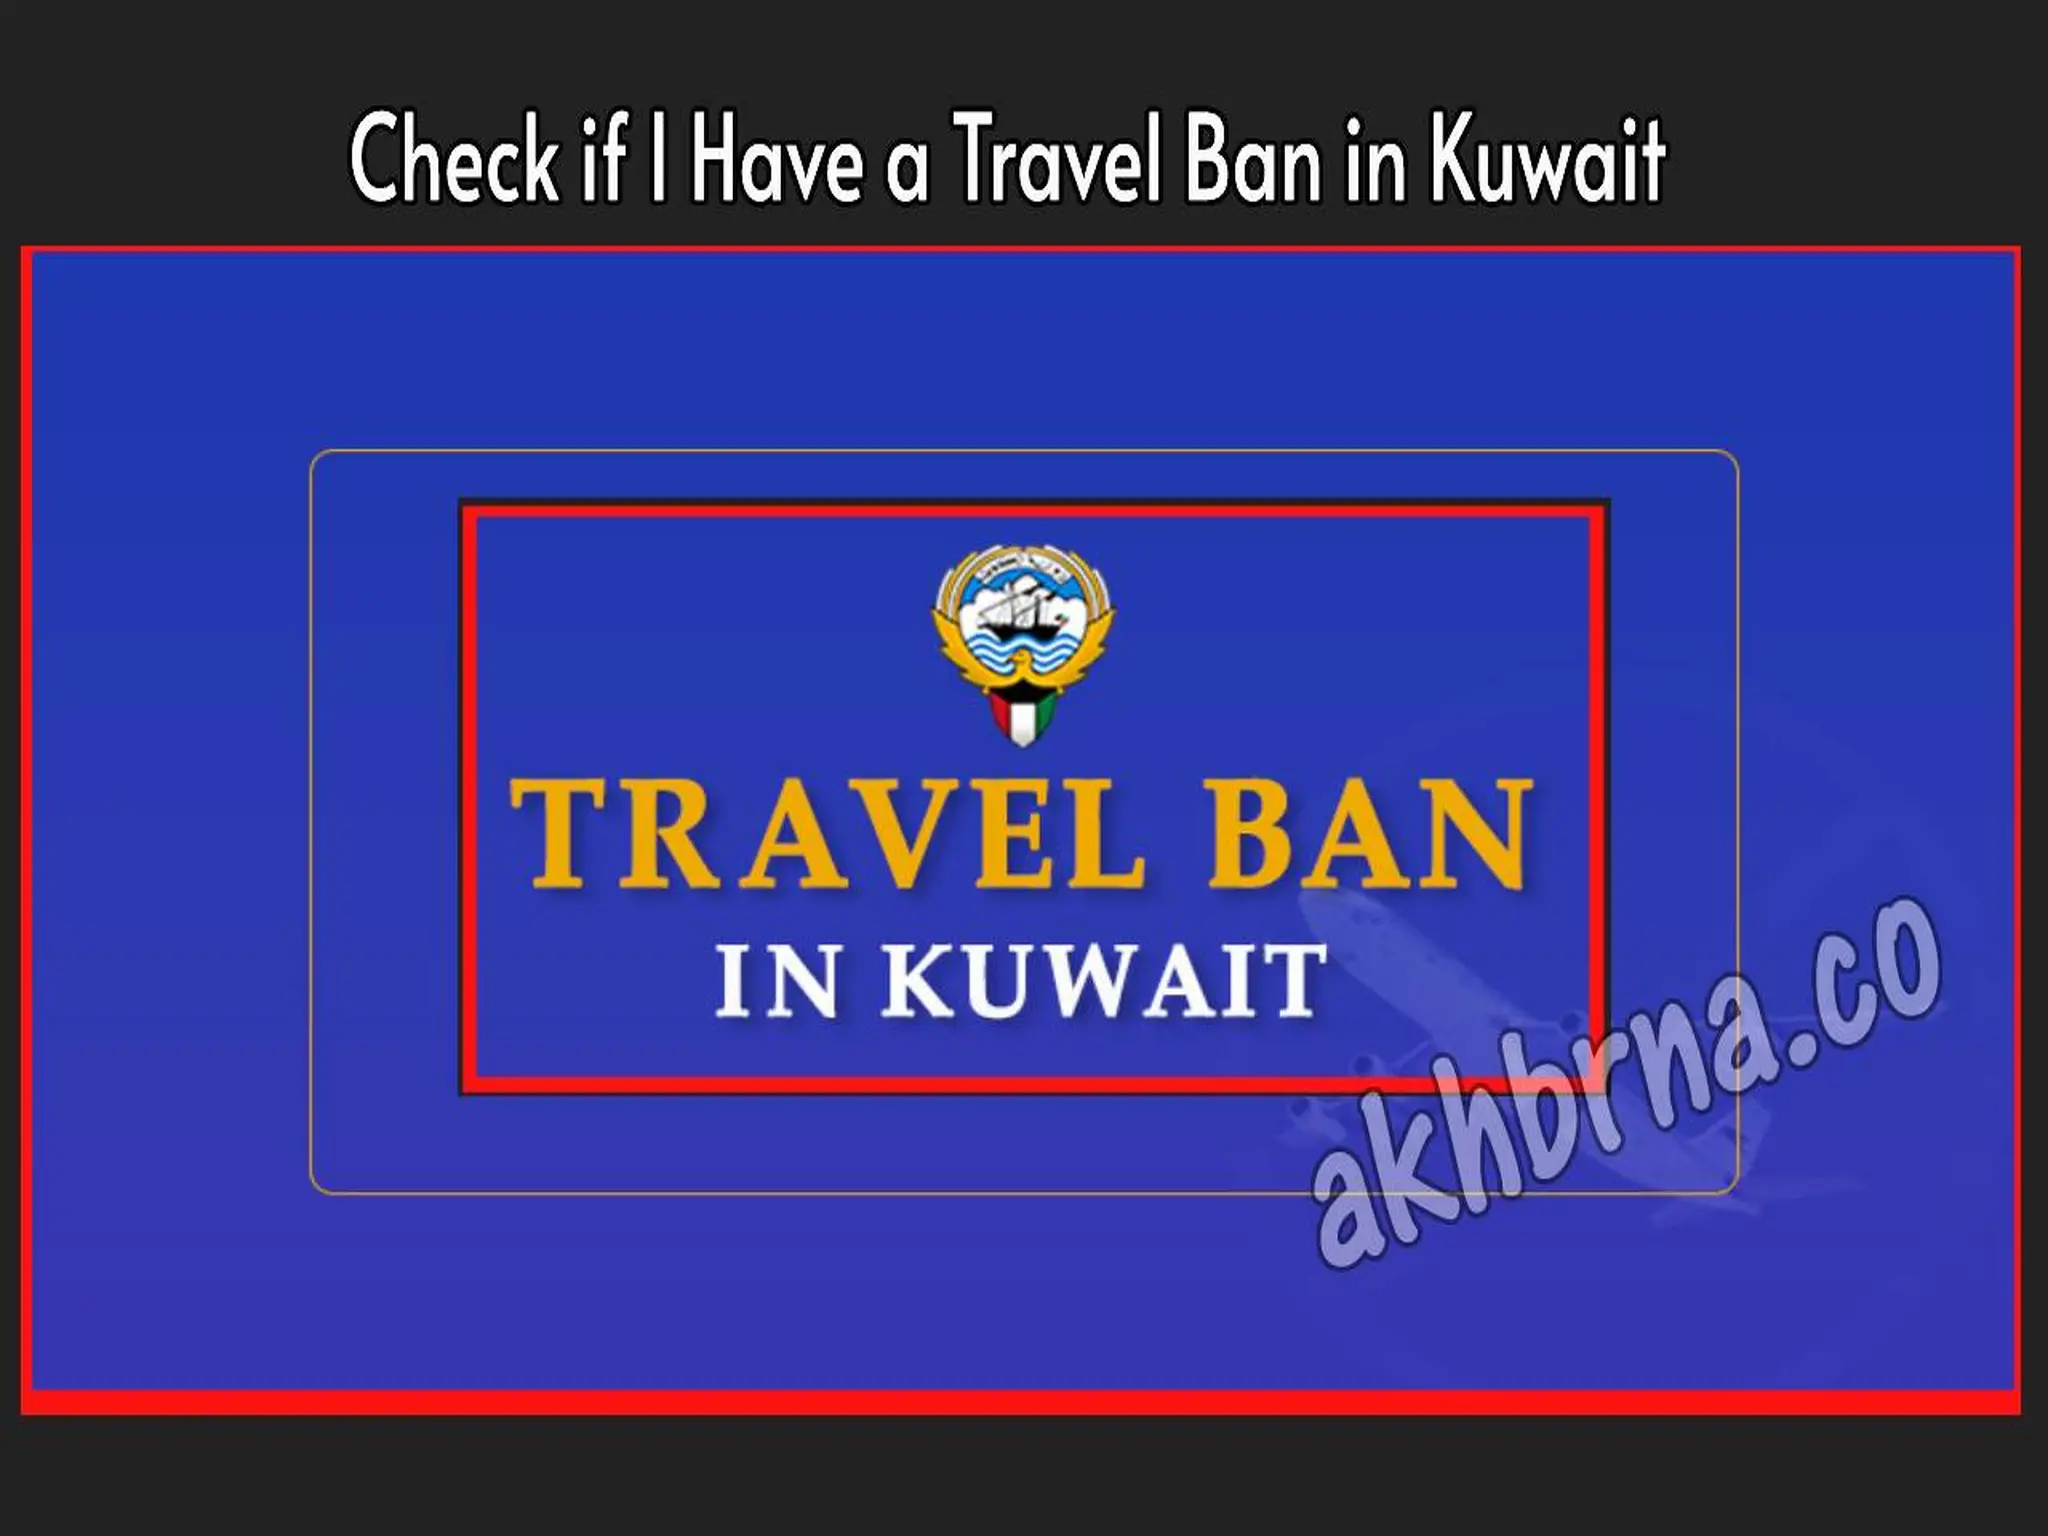 How to Check if I Have a Travel Ban in Kuwait Online?